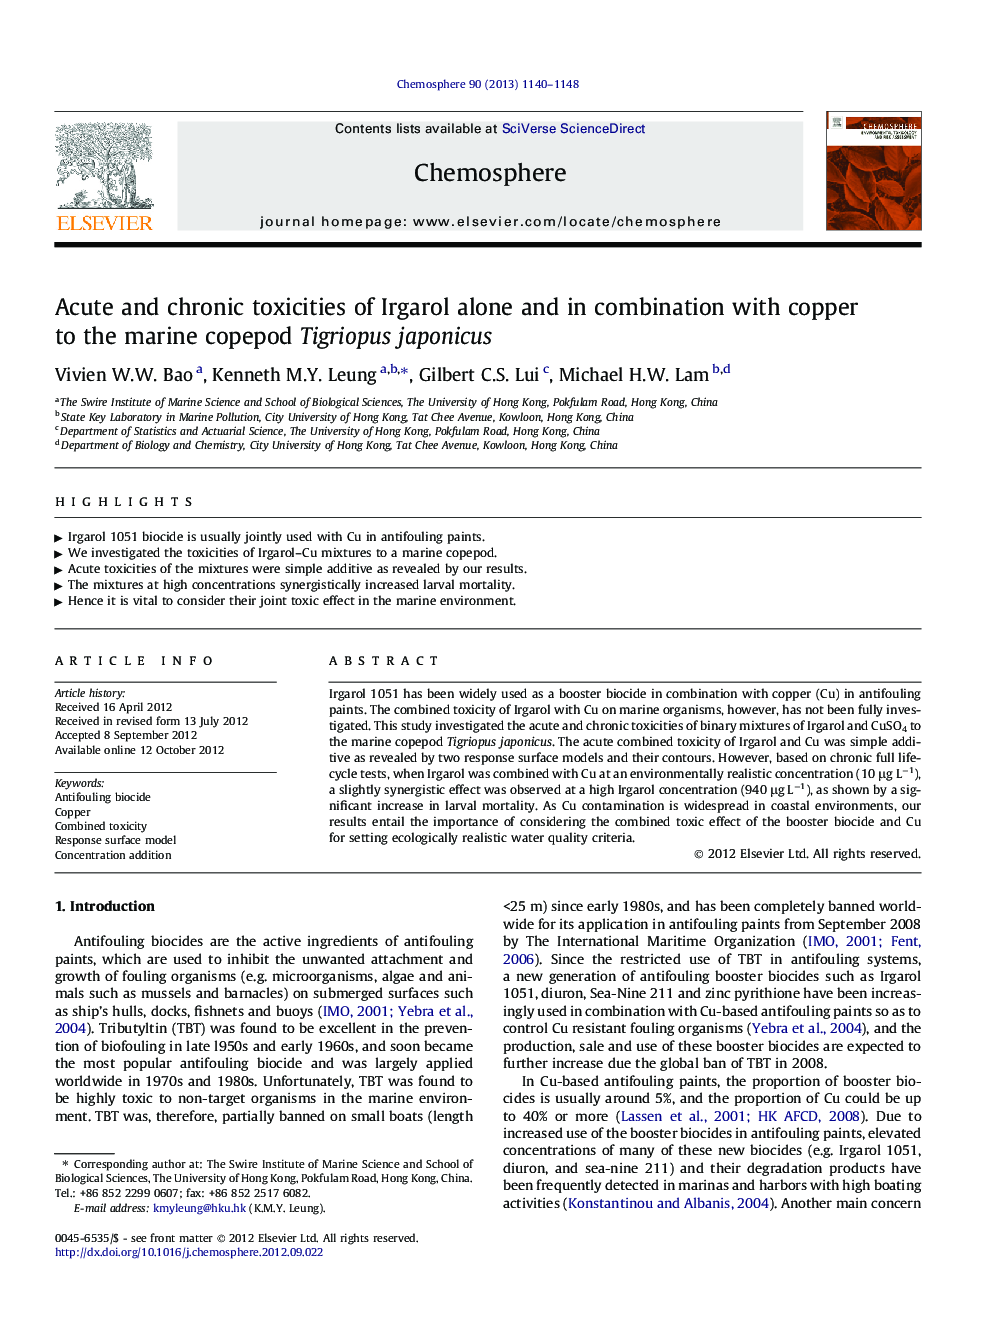 Acute and chronic toxicities of Irgarol alone and in combination with copper to the marine copepod Tigriopus japonicus